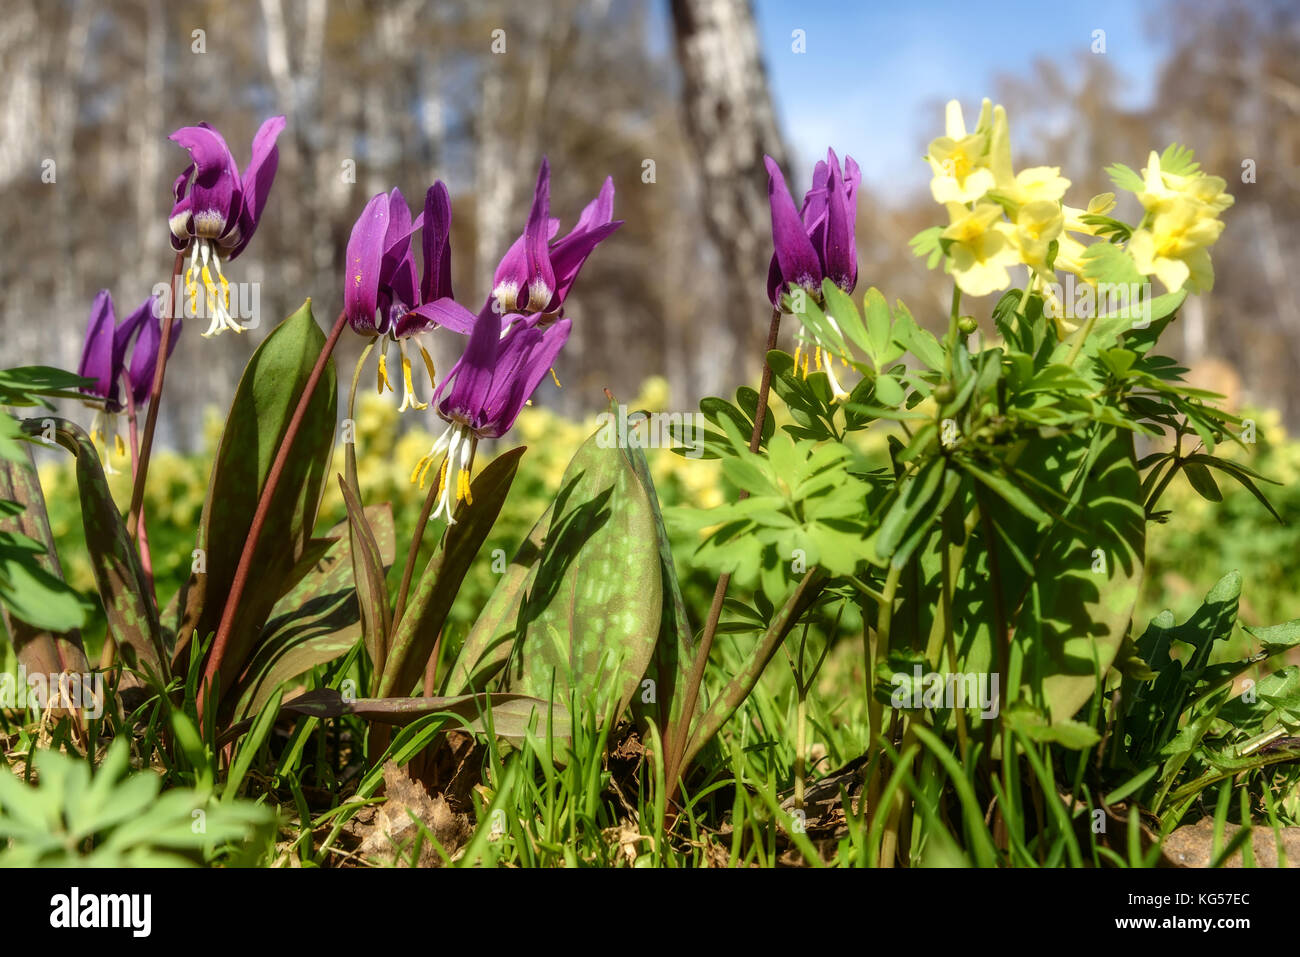 Beautiful spring floral background with burgundy delicate flowers Erythronium sibiricum in the grass close-up on a blurred background of trunks of bir Stock Photo